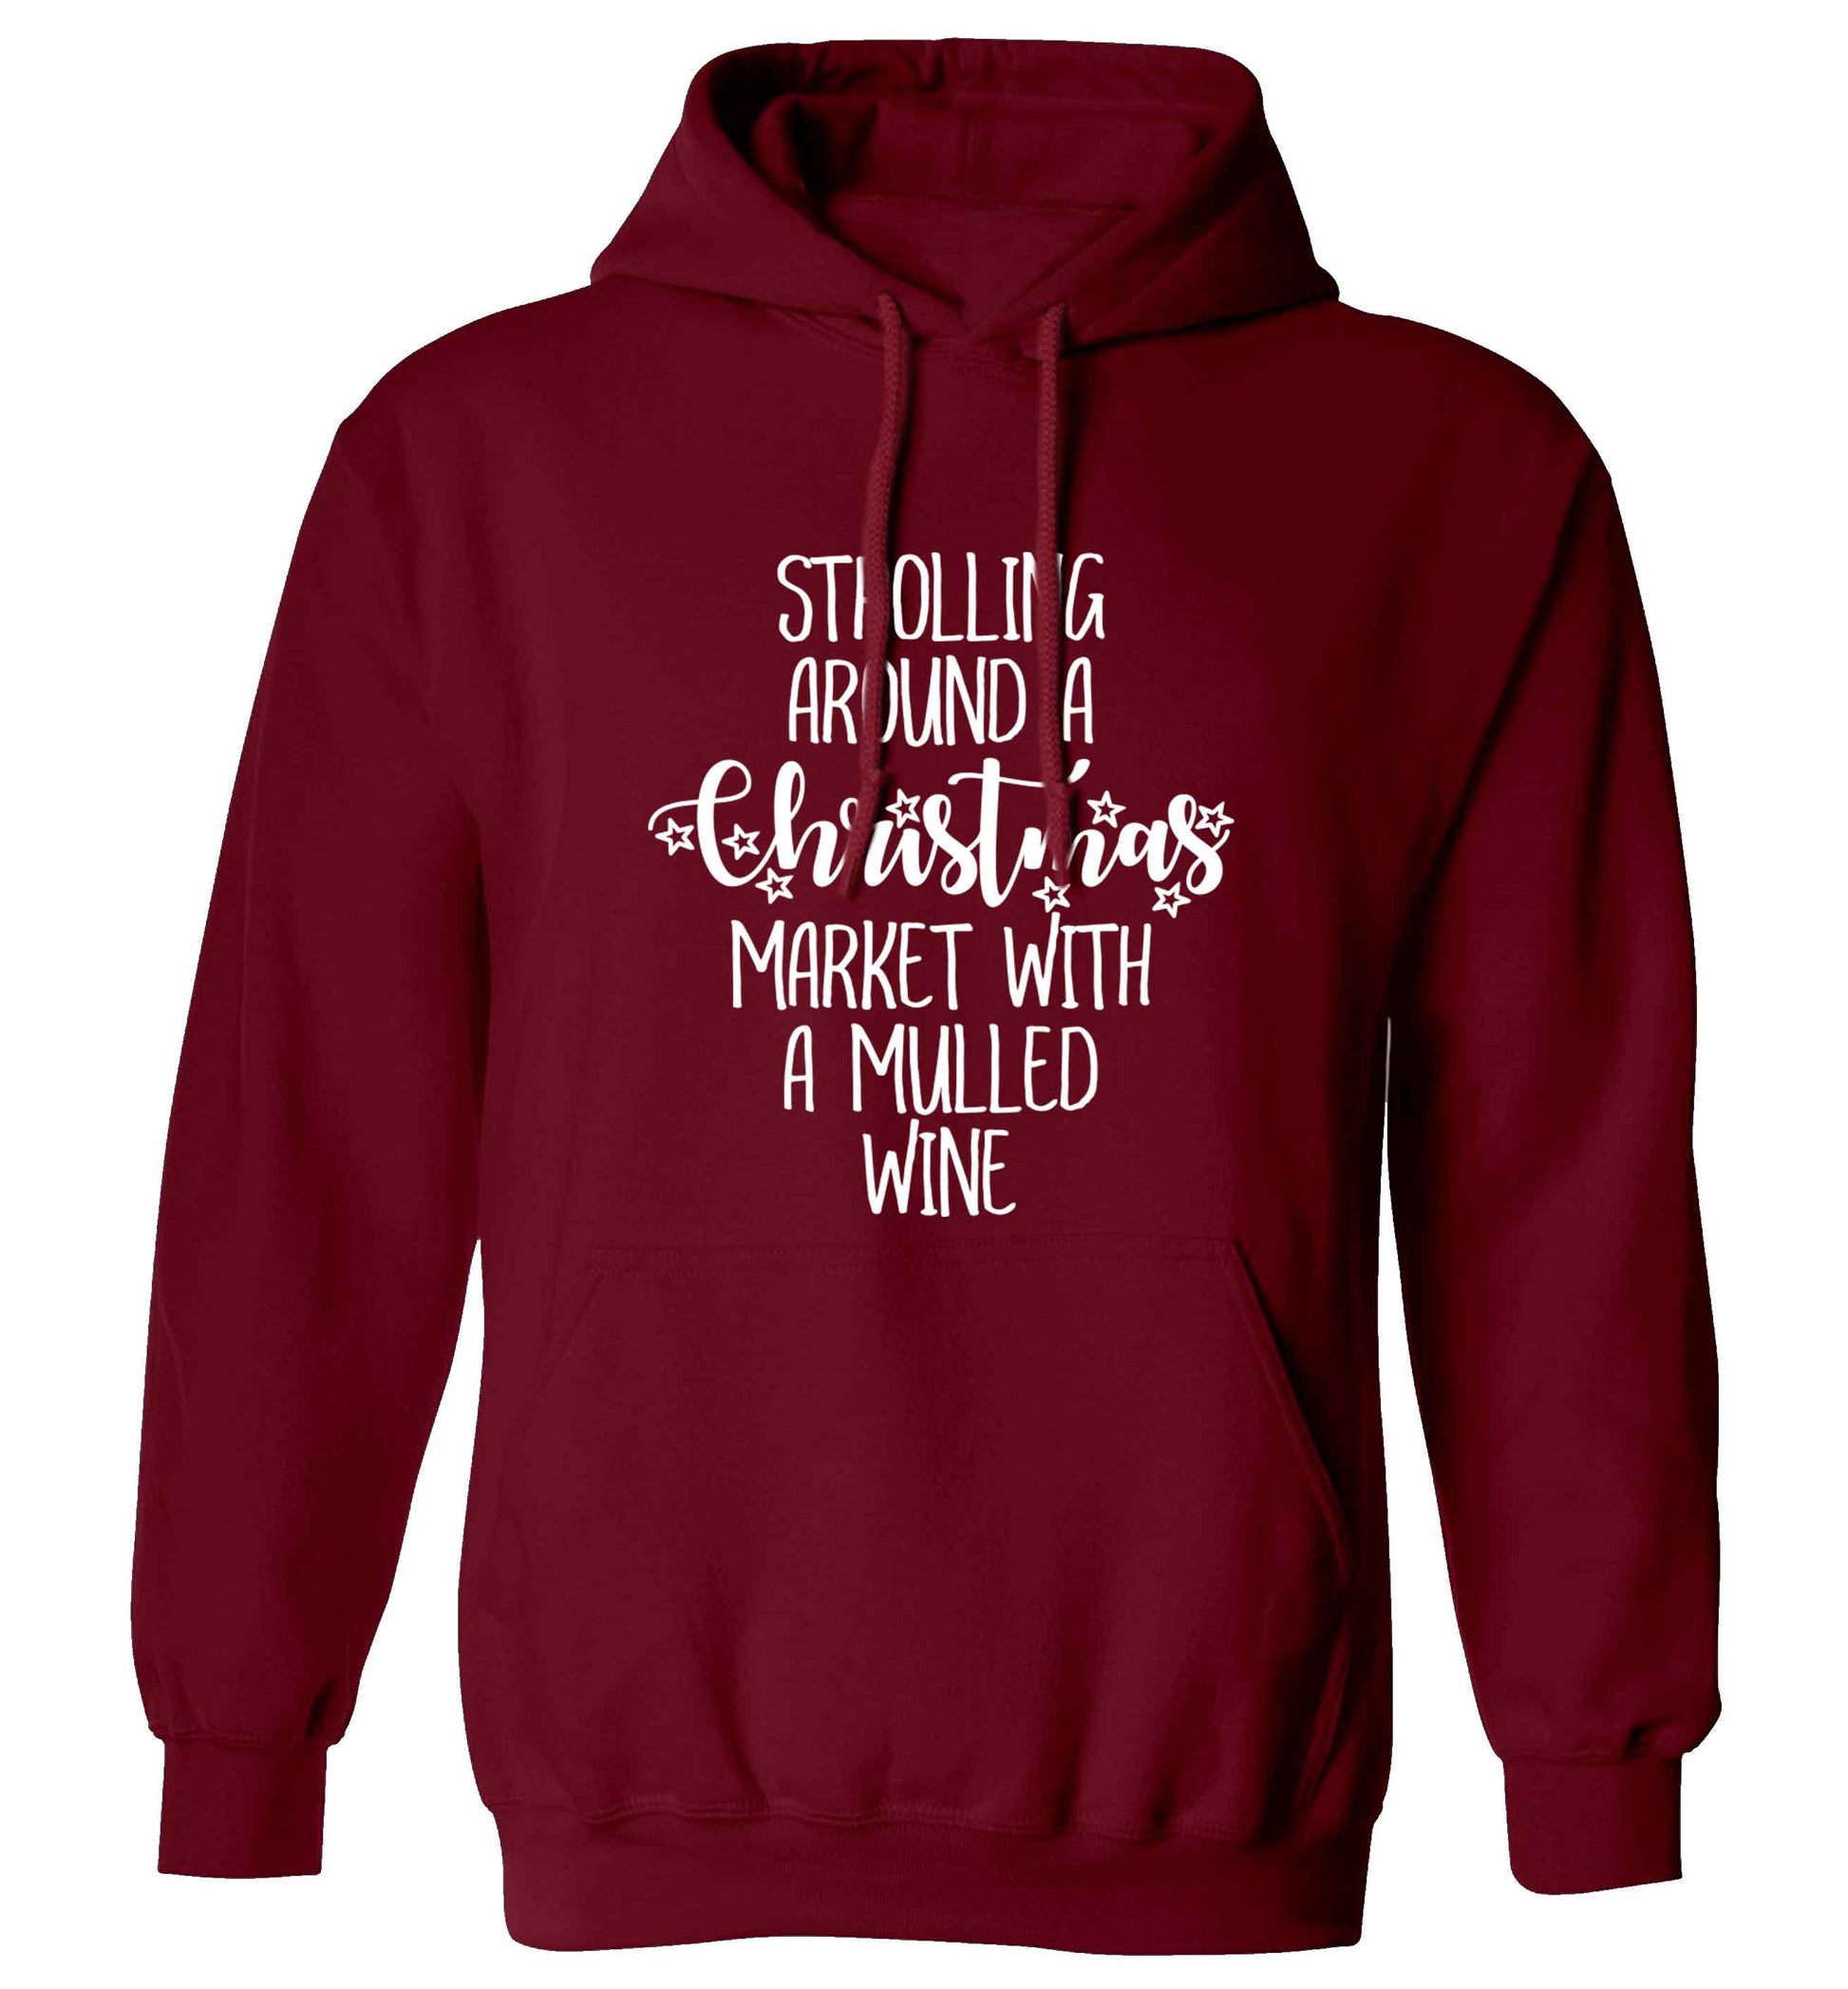 Strolling around a Christmas market with mulled wine adults unisex maroon hoodie 2XL